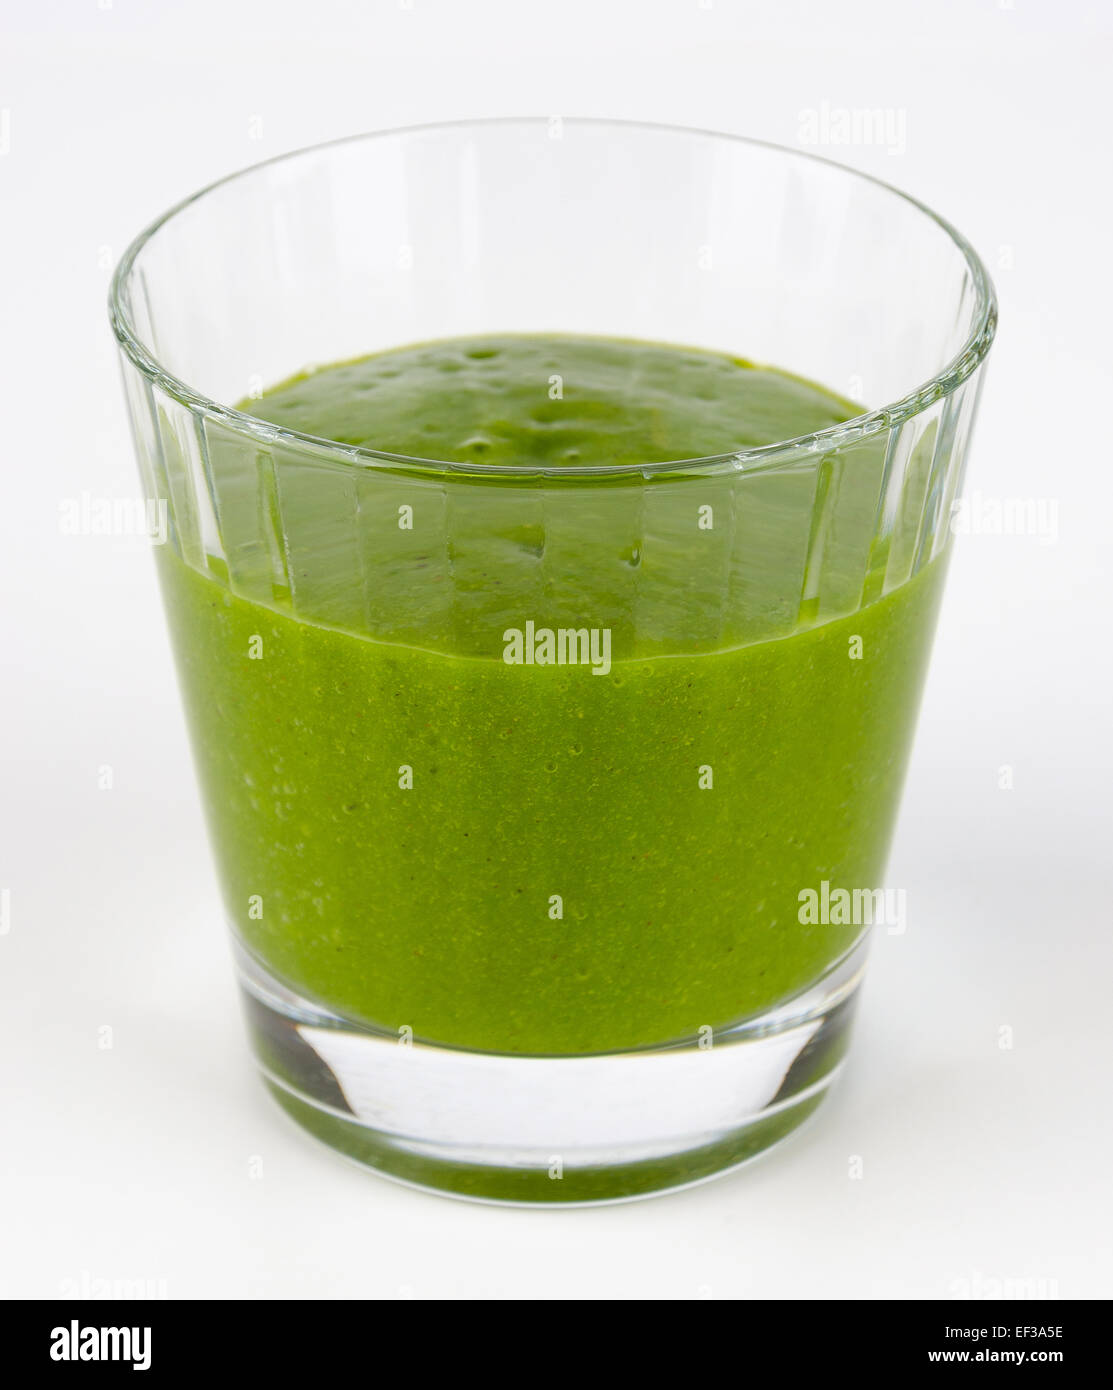 Green smoothie made of organic spinach, kale and fruits in a glass. A raw, healthy, fresh and vegan beverage. Stock Photo